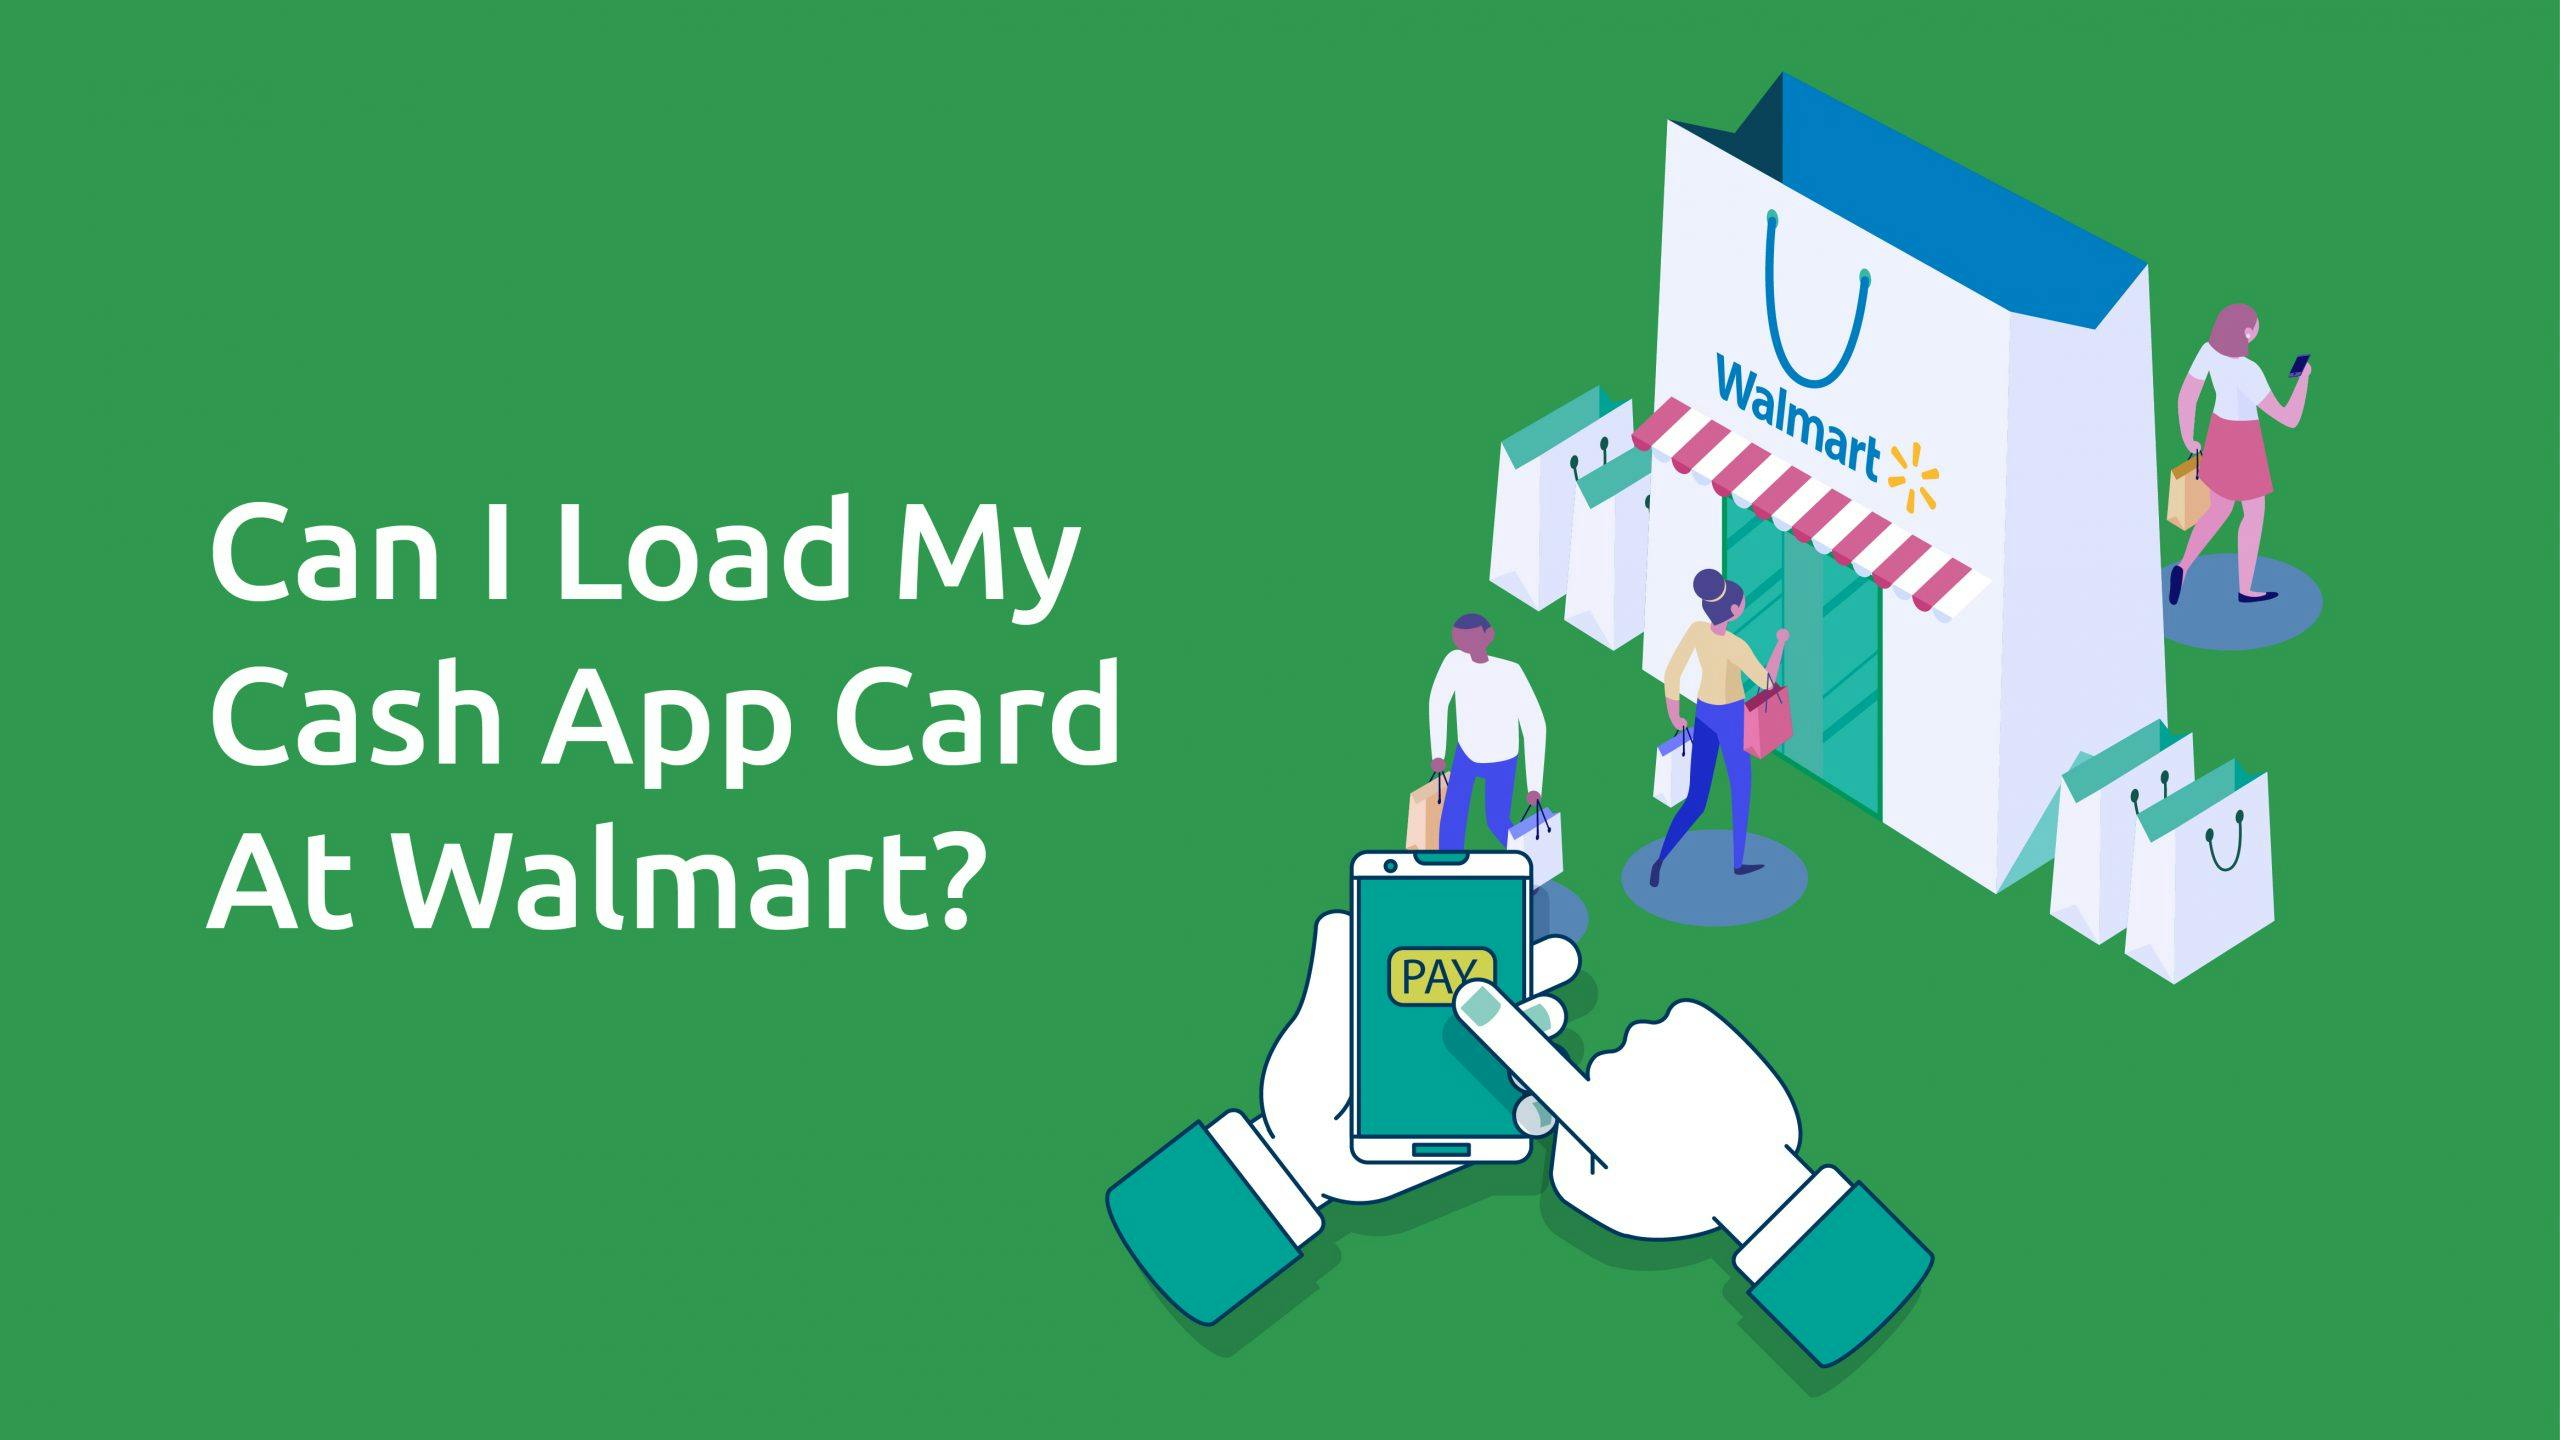 how-to-add-money-to-cash-app-card-at-walmart.jpg